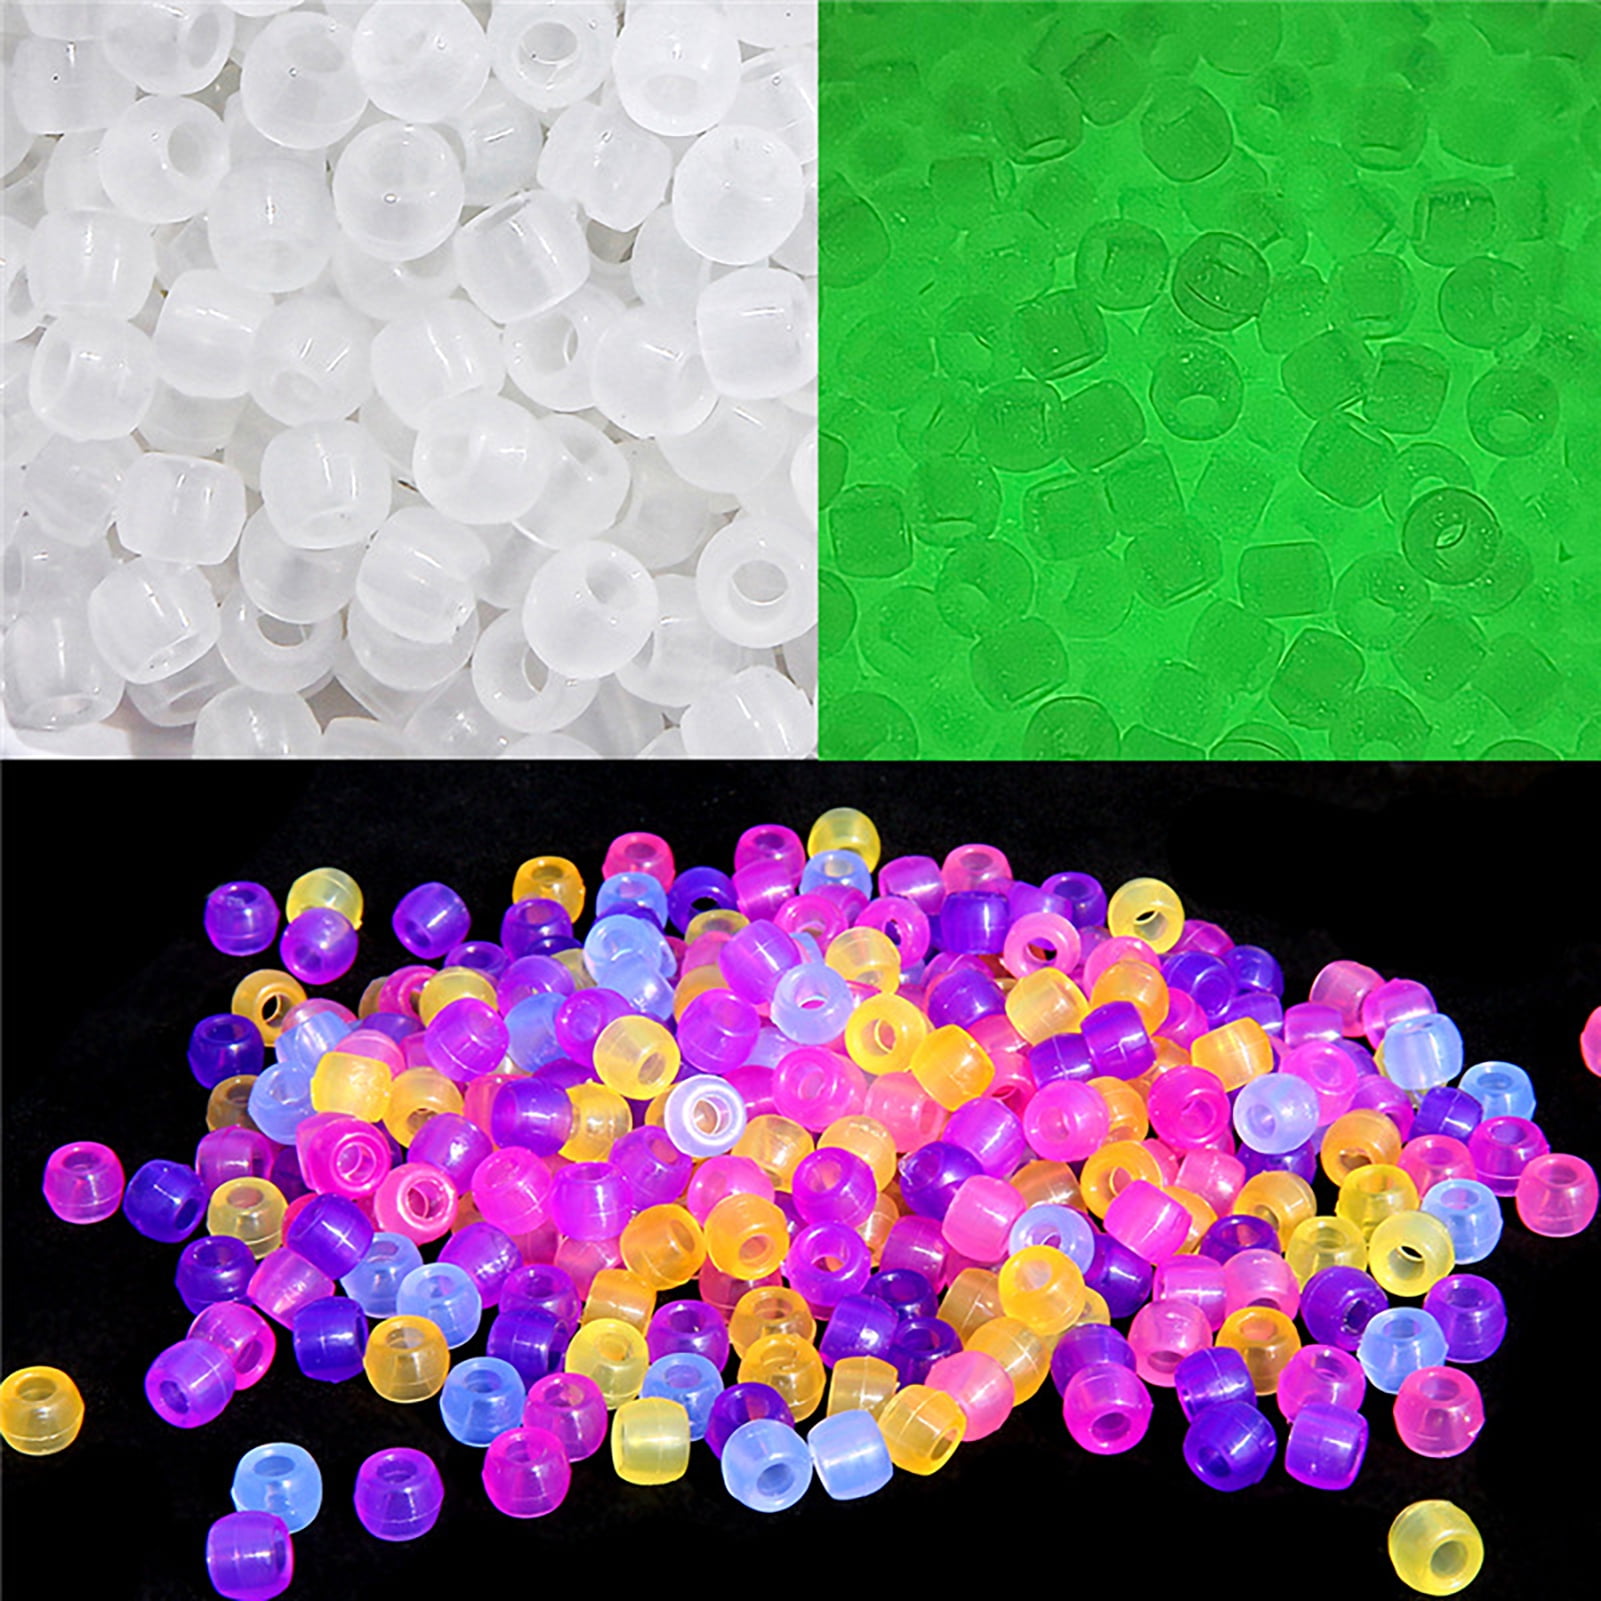 AquaBeads Super Refill 24 Bead Colors Over 2400 Beads New